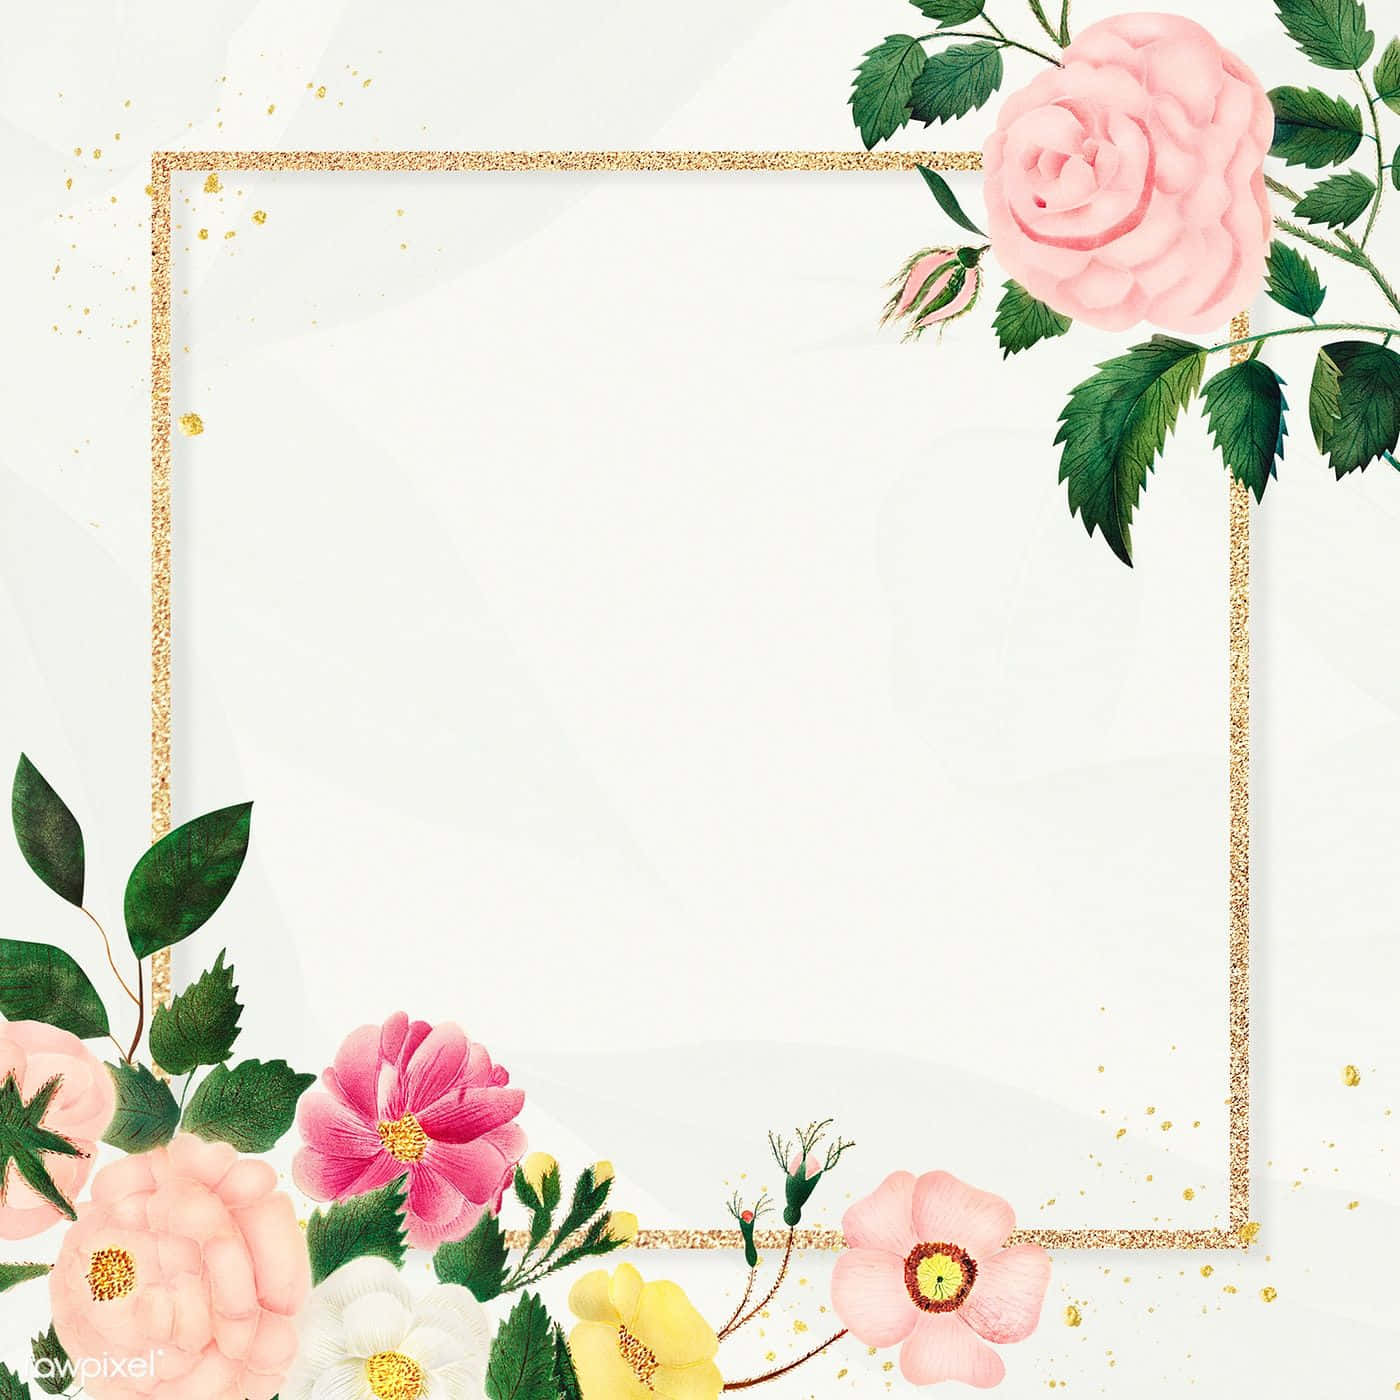 Refreshing and delicate vintage flower background